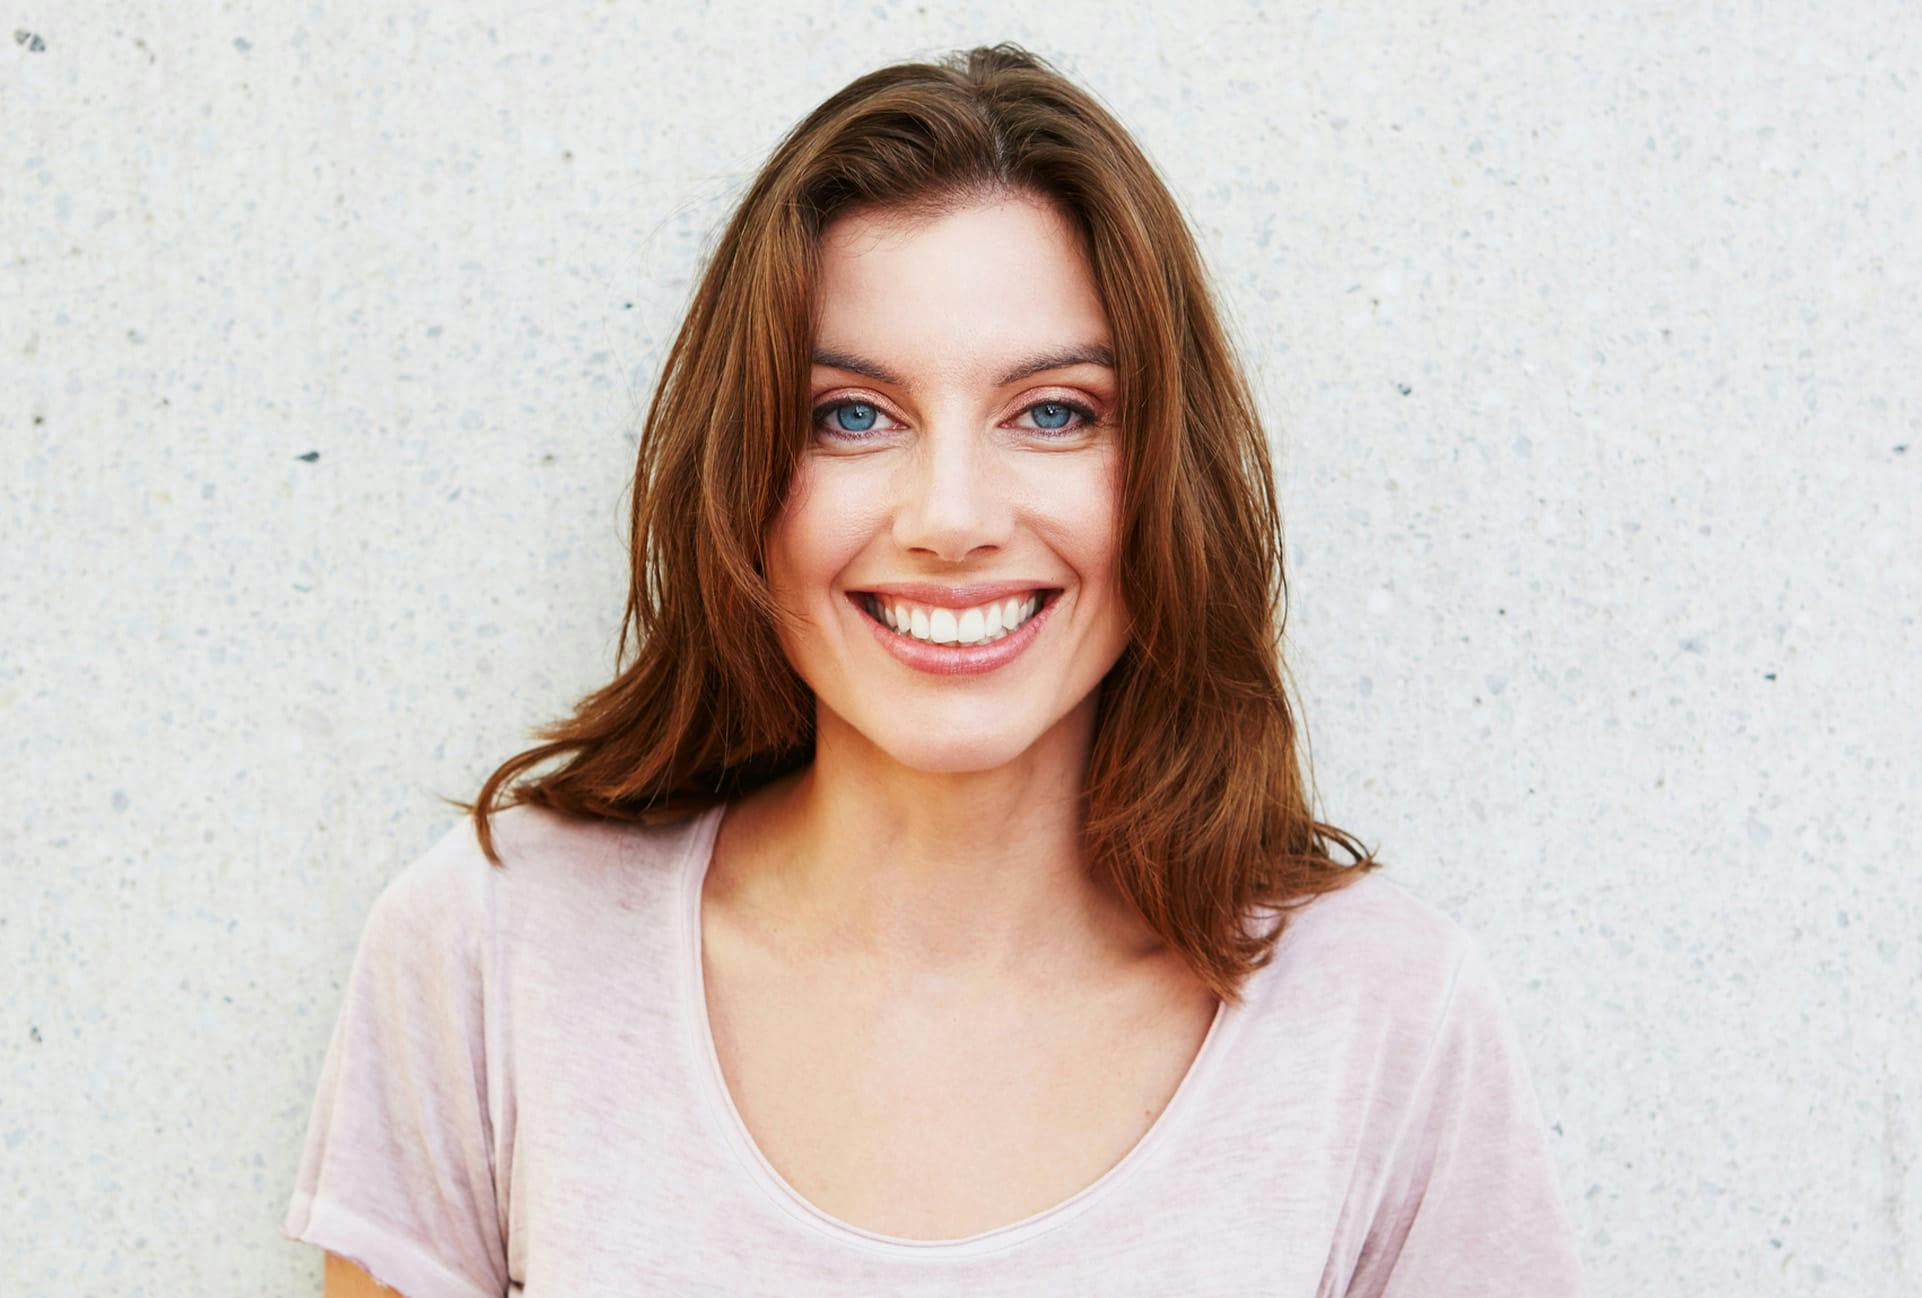 Woman standing against a wall and smiling